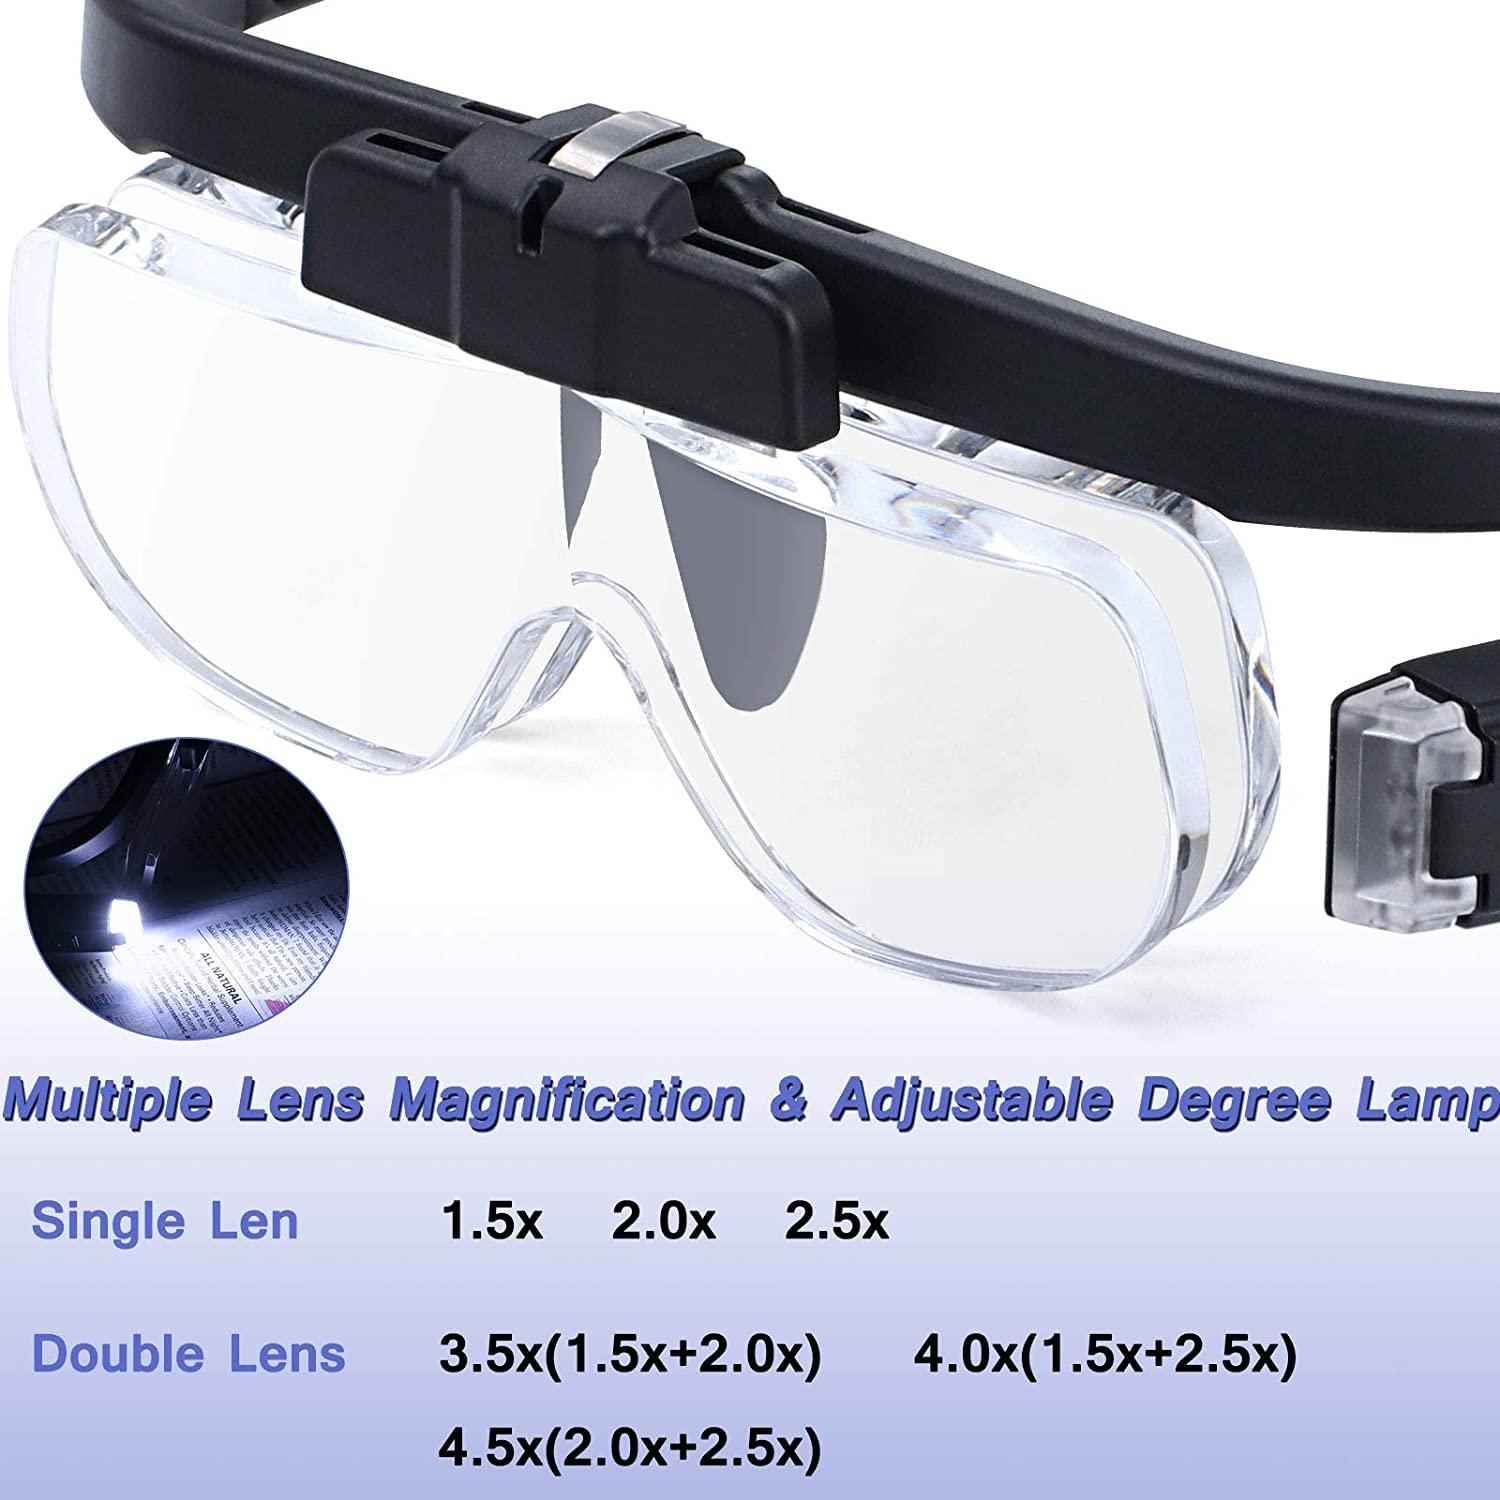 Magnifying glasses for modeling and crafts: increase your reality